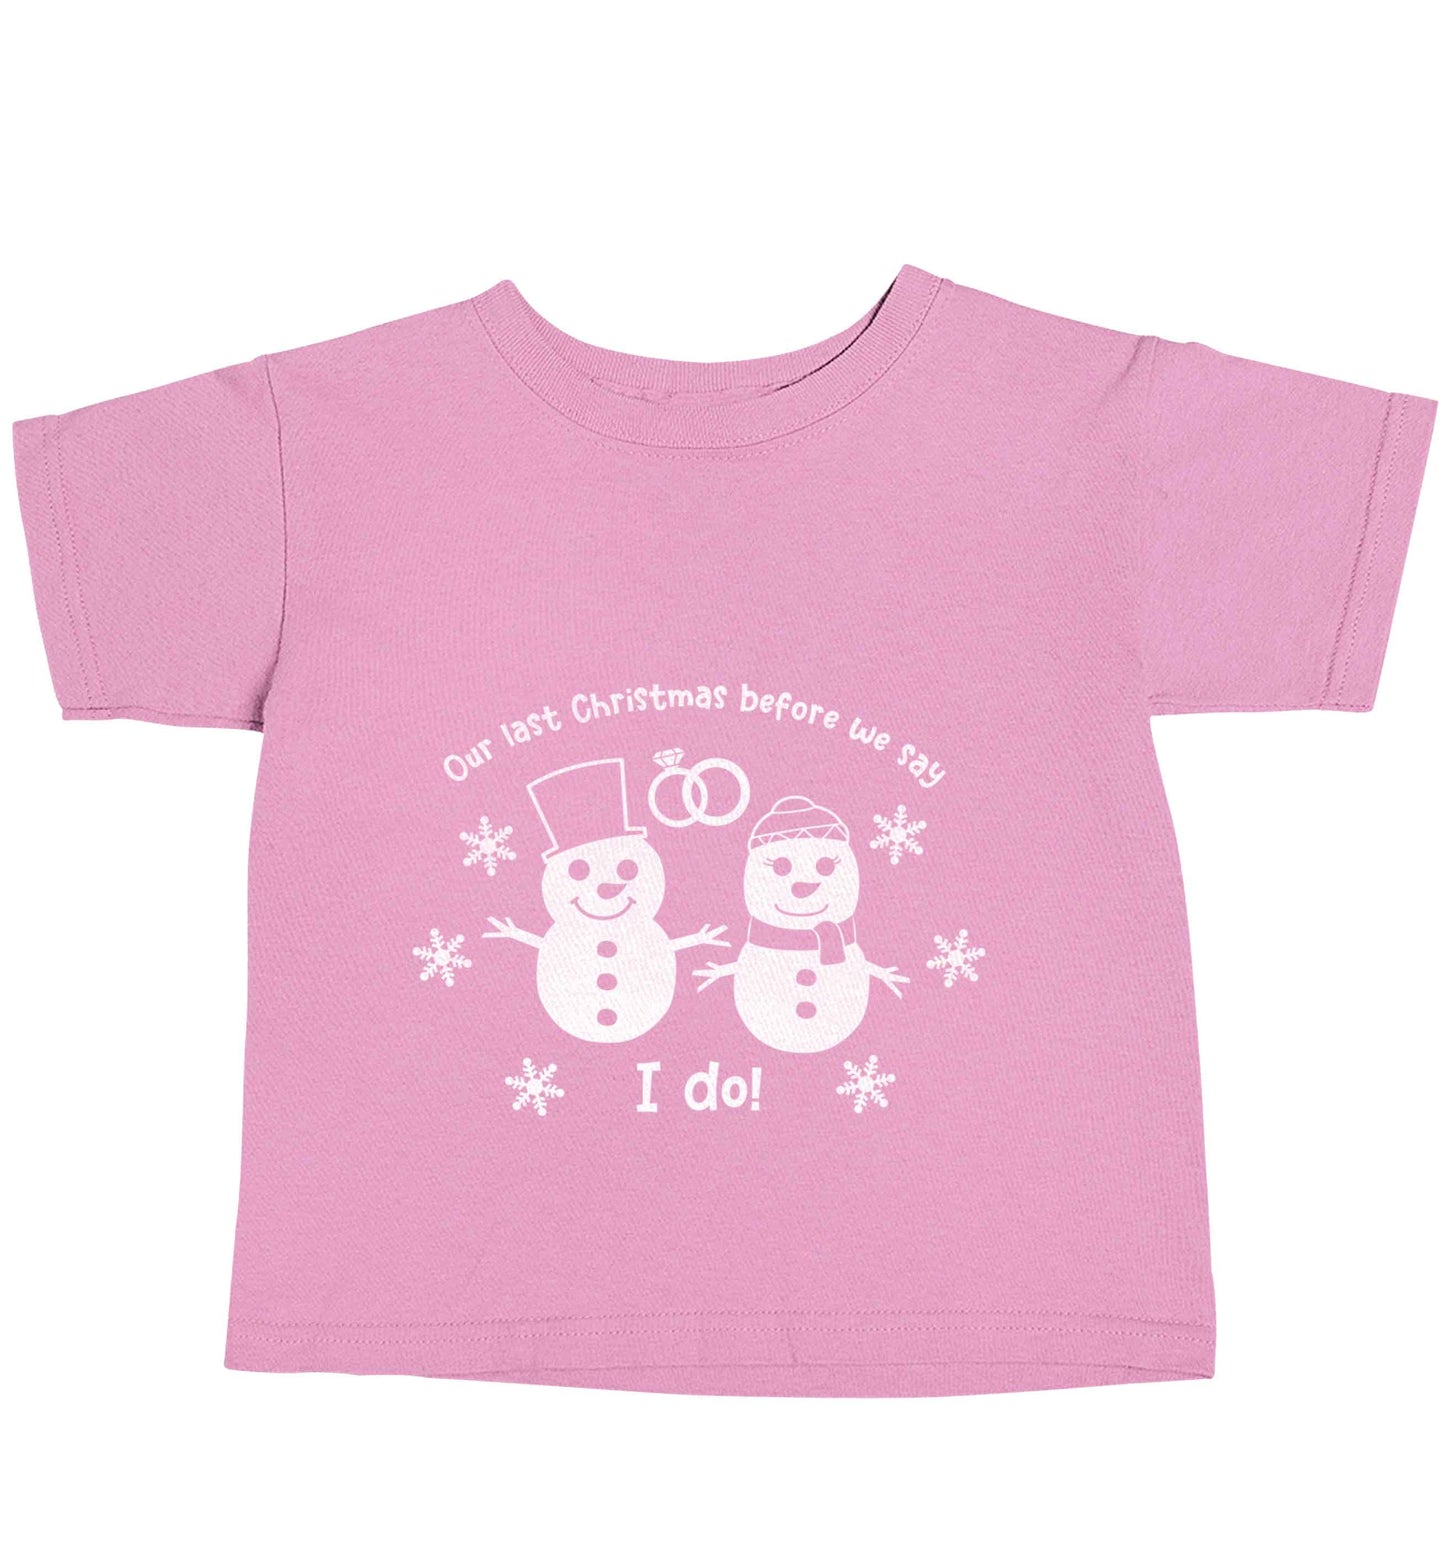 Last Christmas before we say I do light pink baby toddler Tshirt 2 Years